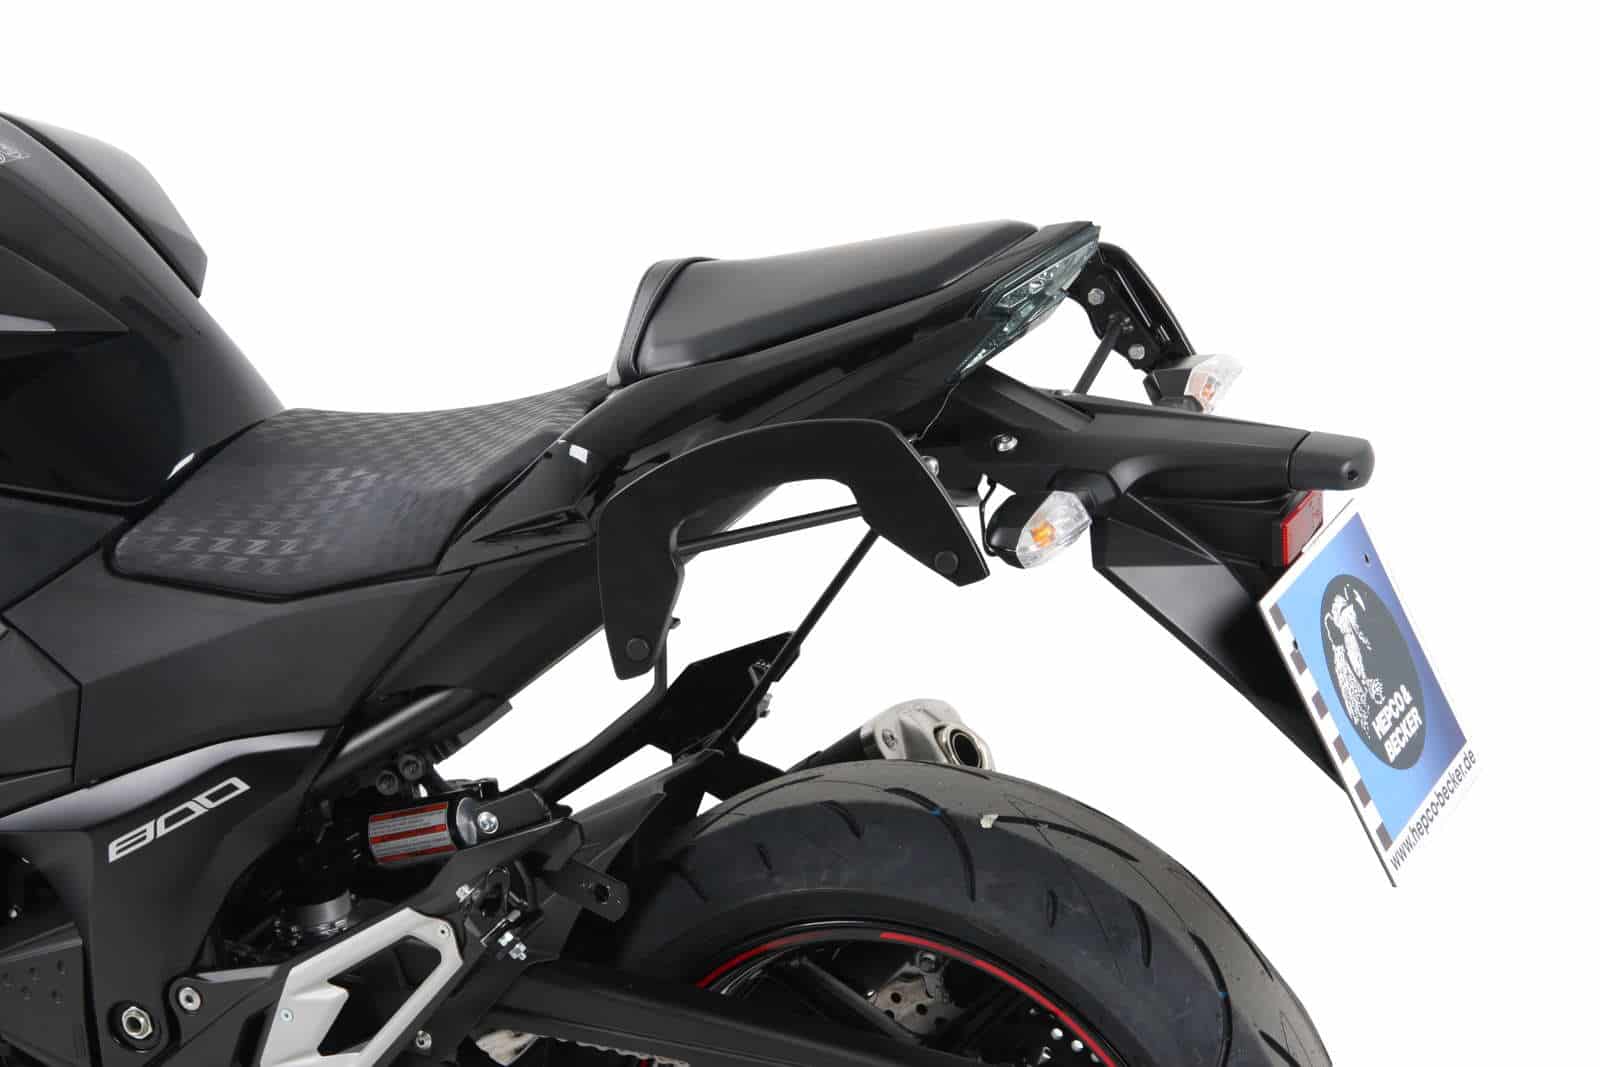 C-Bow sidecarrier for Kawasaki Z 800/E Version (2013-2016)